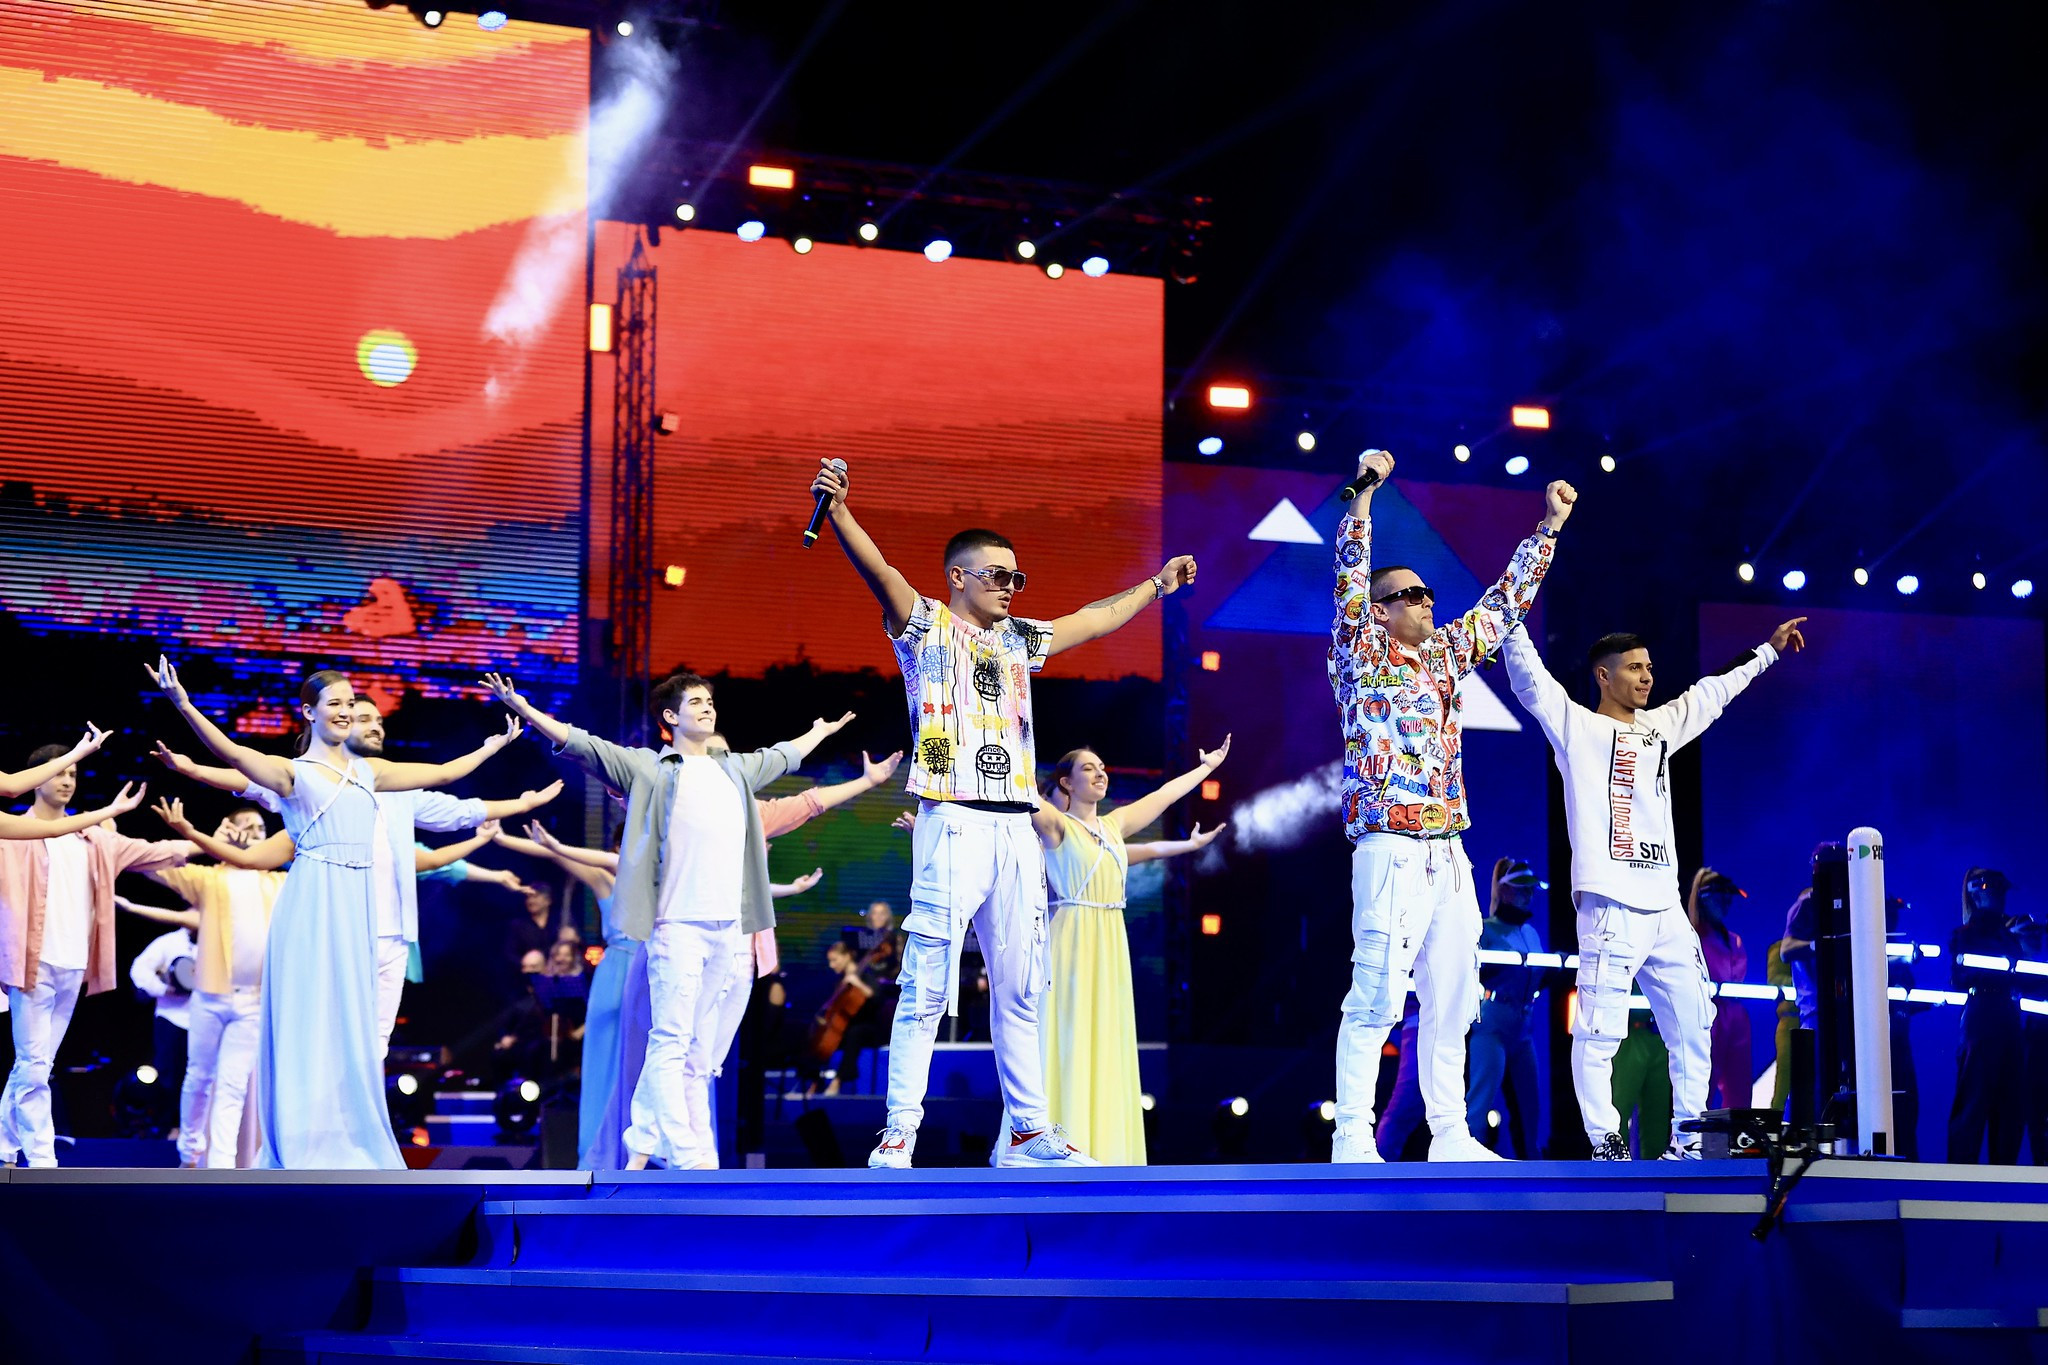 Musical acts and dancers were a feature of the Opening Ceremony ©AIBA